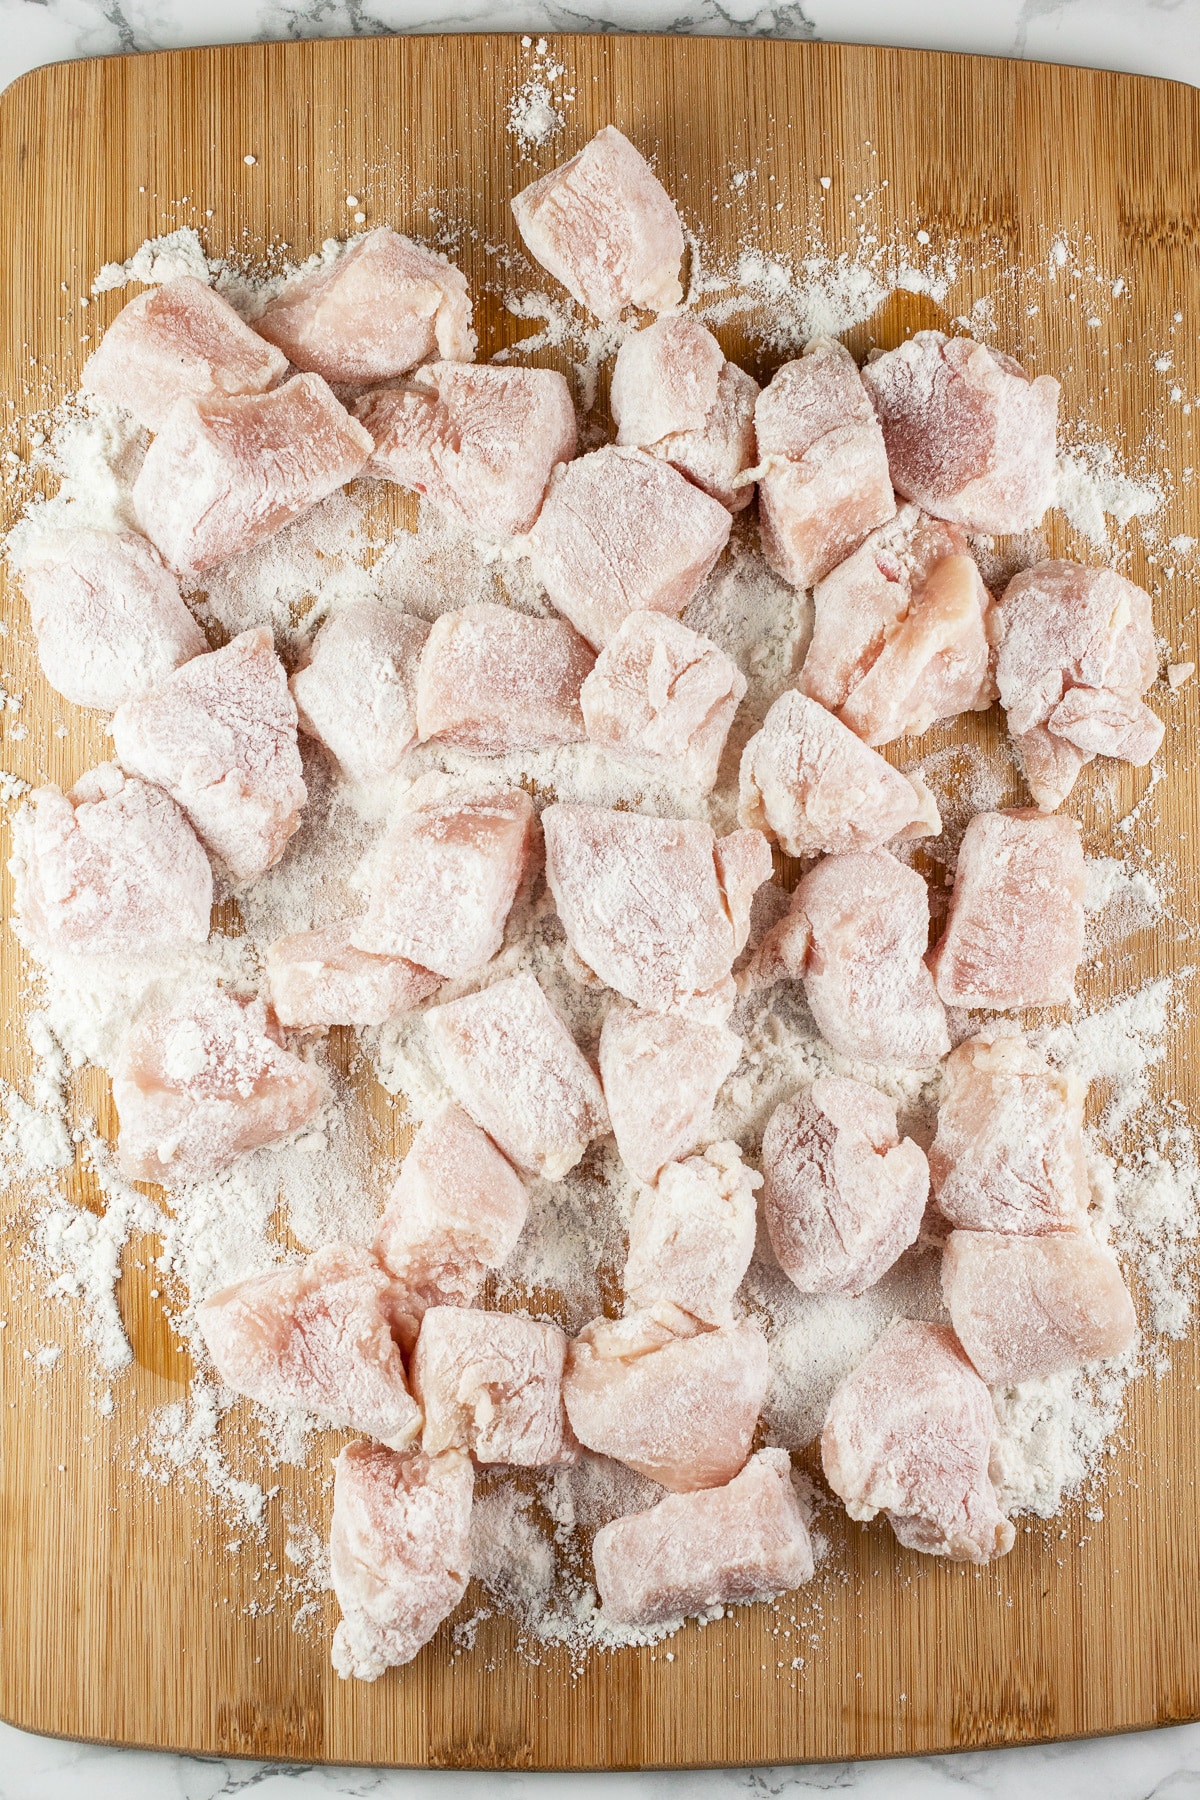 Raw chicken breasts coated in flour on wooden cutting board.